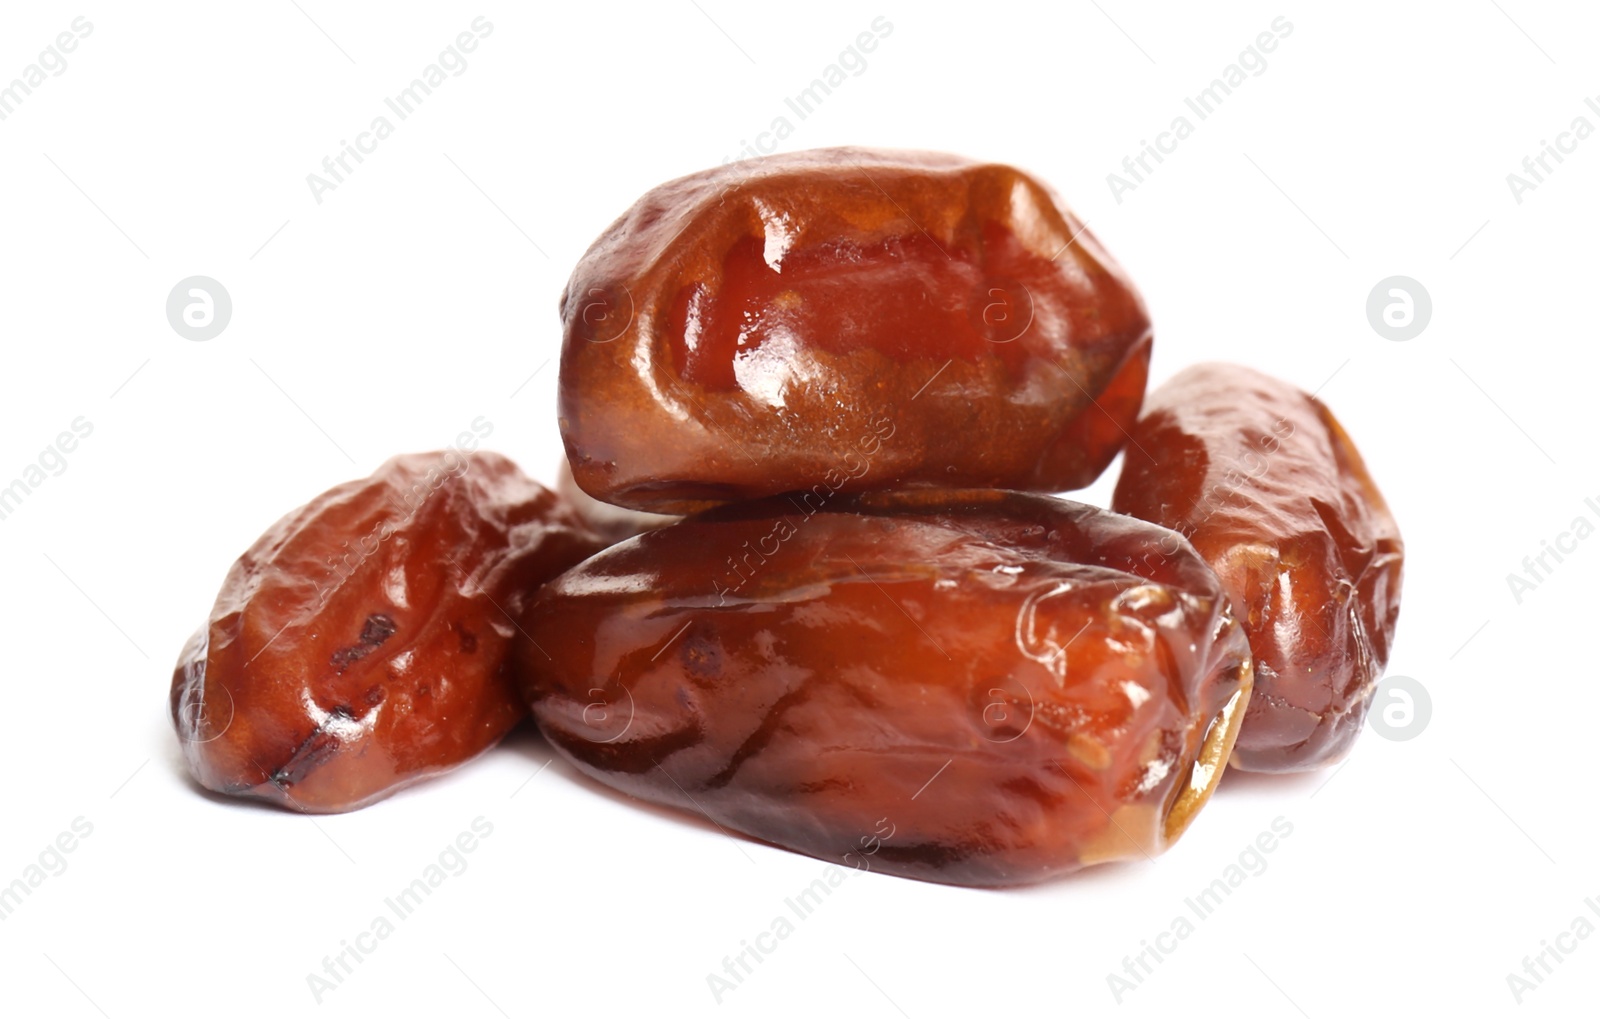 Photo of Heap of tasty sweet dried dates on white background